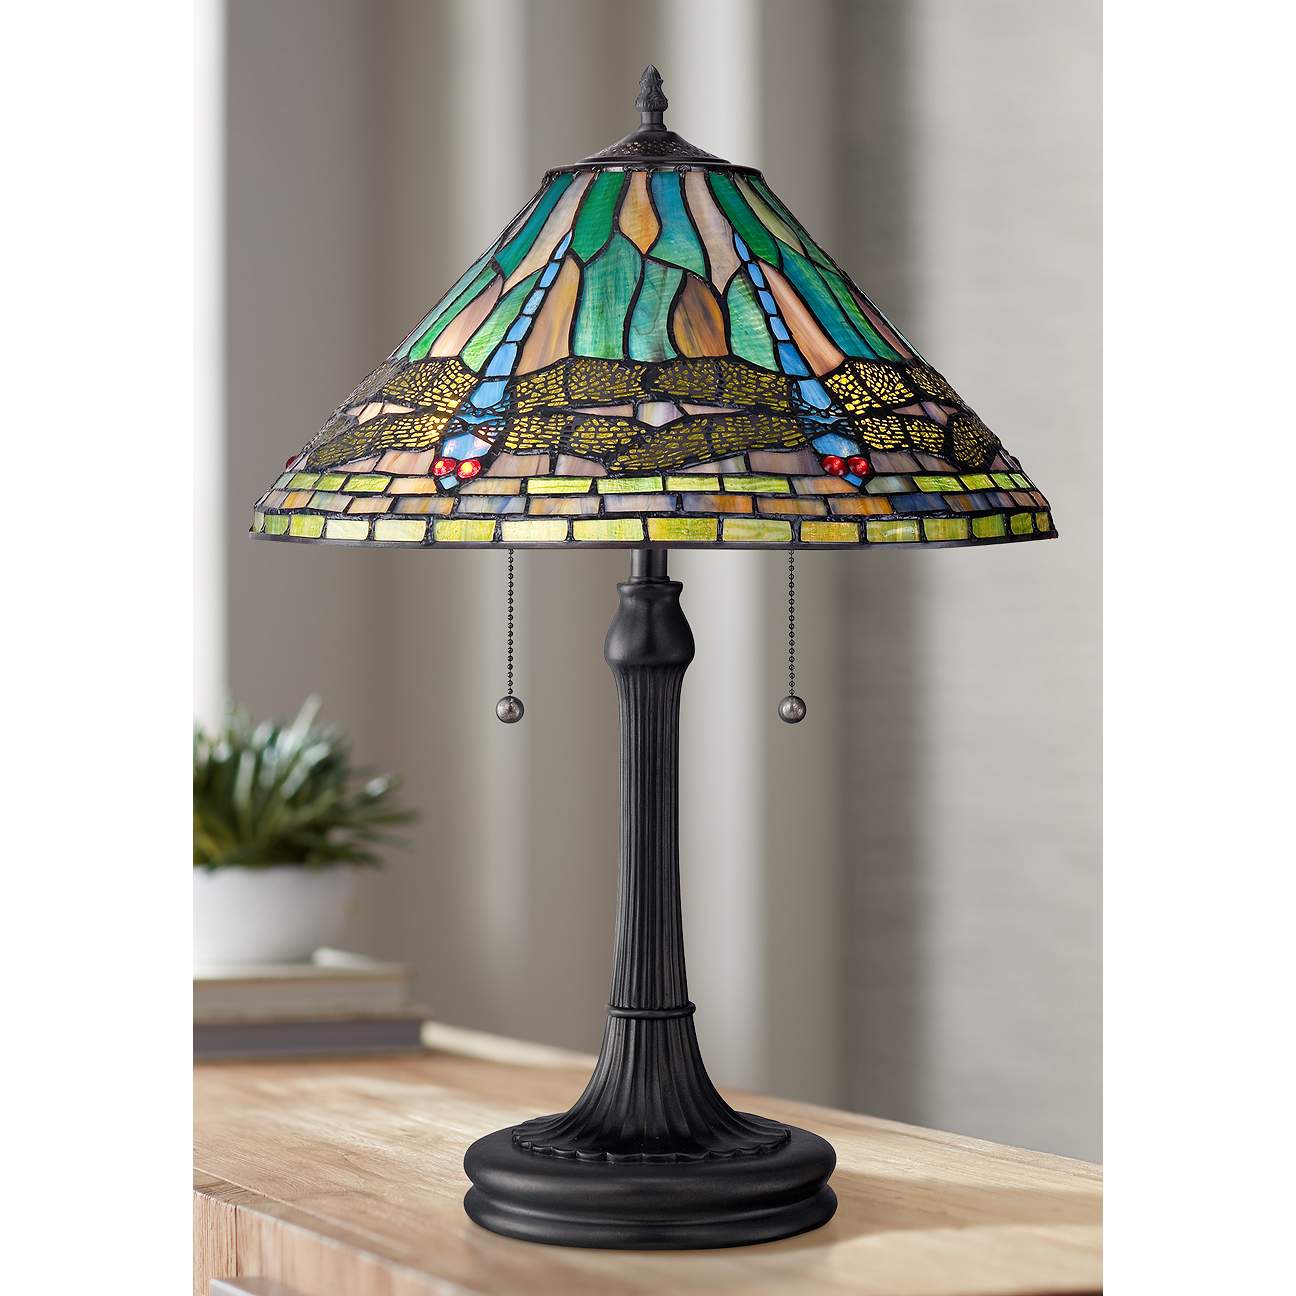 Quoizel King Vintage Bronze Tiffany-Style Table Lamp - #43F78 | Lamps Plus